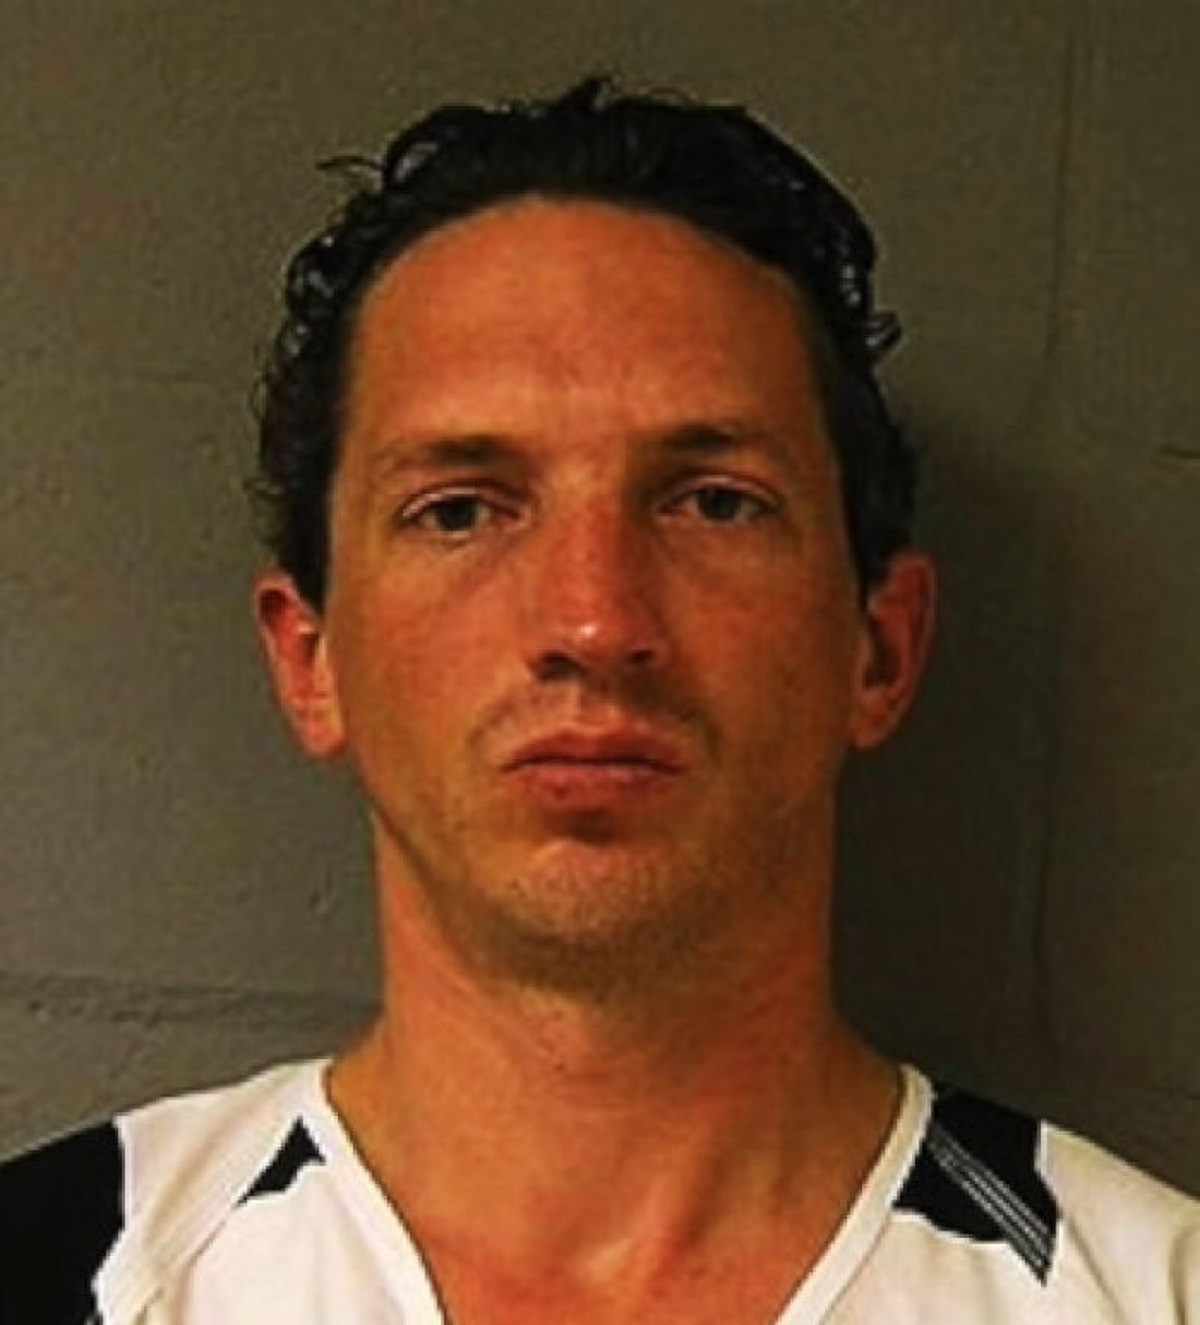 Israel Keyes is almost certainly the smartest serial killer that has been caught. He studied past serial killers and how they were caught and so:

> Keyes targeted random people all across the United States to avoid detection with months of planning before he committed a particular crime. He specifically went for campgrounds and isolated locations. He claimed to only use guns when he had to and preferred strangulation.

> Keyes planned murders long ahead of time and took extraordinary action to avoid detection. Unlike most serial killers, he did not have a victim profile, saying he chose a victim randomly. On his murder trips, he kept his mobile phone turned off and paid for items with cash. He had no connection to any of his known victims. For the Currier murders, Keyes flew to Chicago, where he rented a car to drive 1,000 miles (1,600 kilometers) to Vermont. He then used the "murder kit" he had hidden two years earlier to perform the murders.

He was only caught because he kidnapped a girl and tried to get ransom money from her parents and law enforcement tracked him down via withdrawals from her bank account and the car he was seen abducting her in on security cameras. The FBI does not even know how many people he killed so who knows how long he could've kept it up if he had chosen to continue his usual killings.